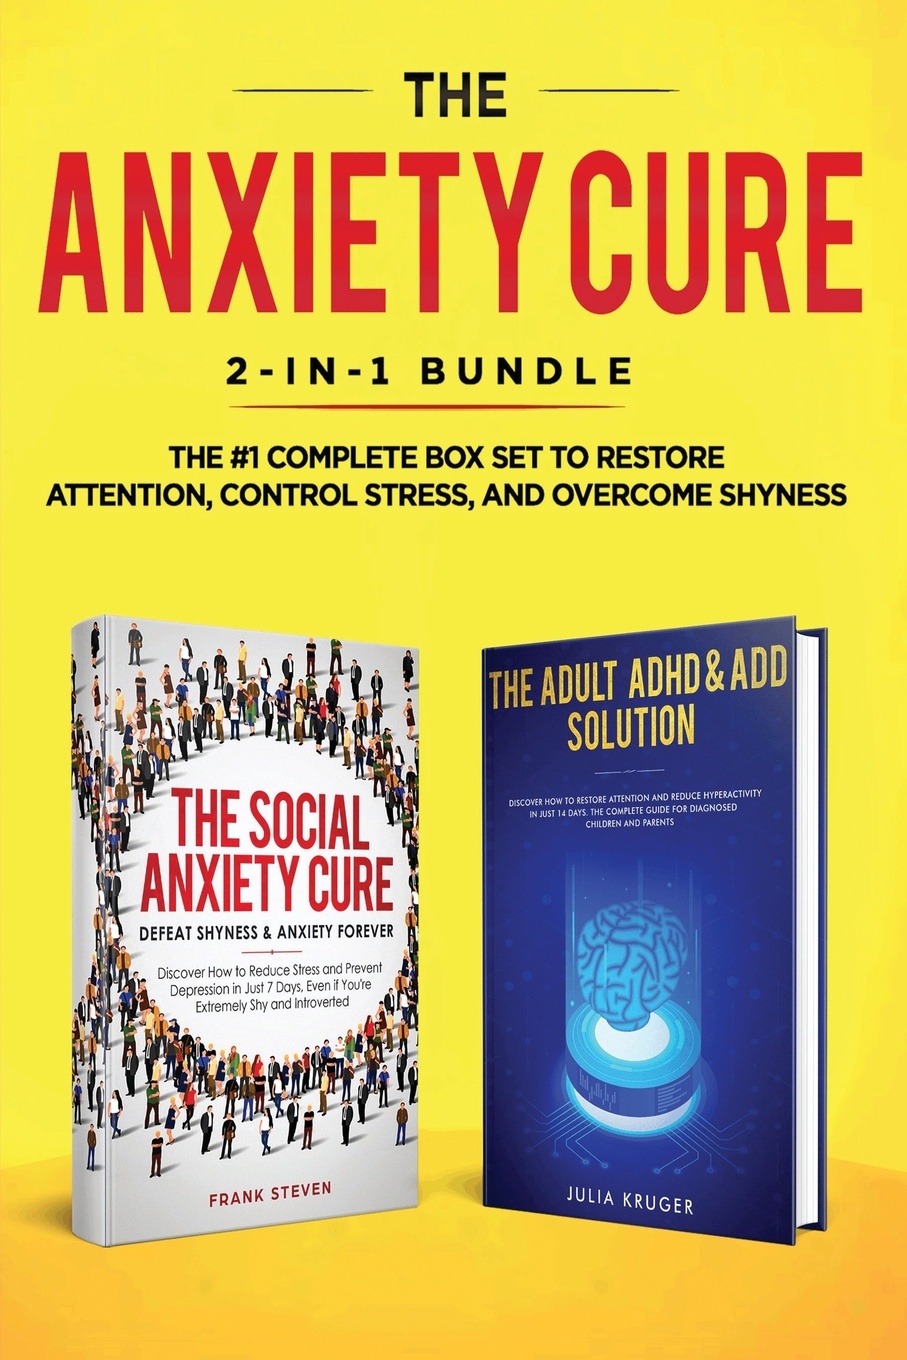 The Anxiety Cure. 2-in-1 Bundle: Social Anxiety Cure + Adult ADHD & ADD Solution - The #1 Complete Box Set to Restore Attention, Control Stress, and Overcome Shyness